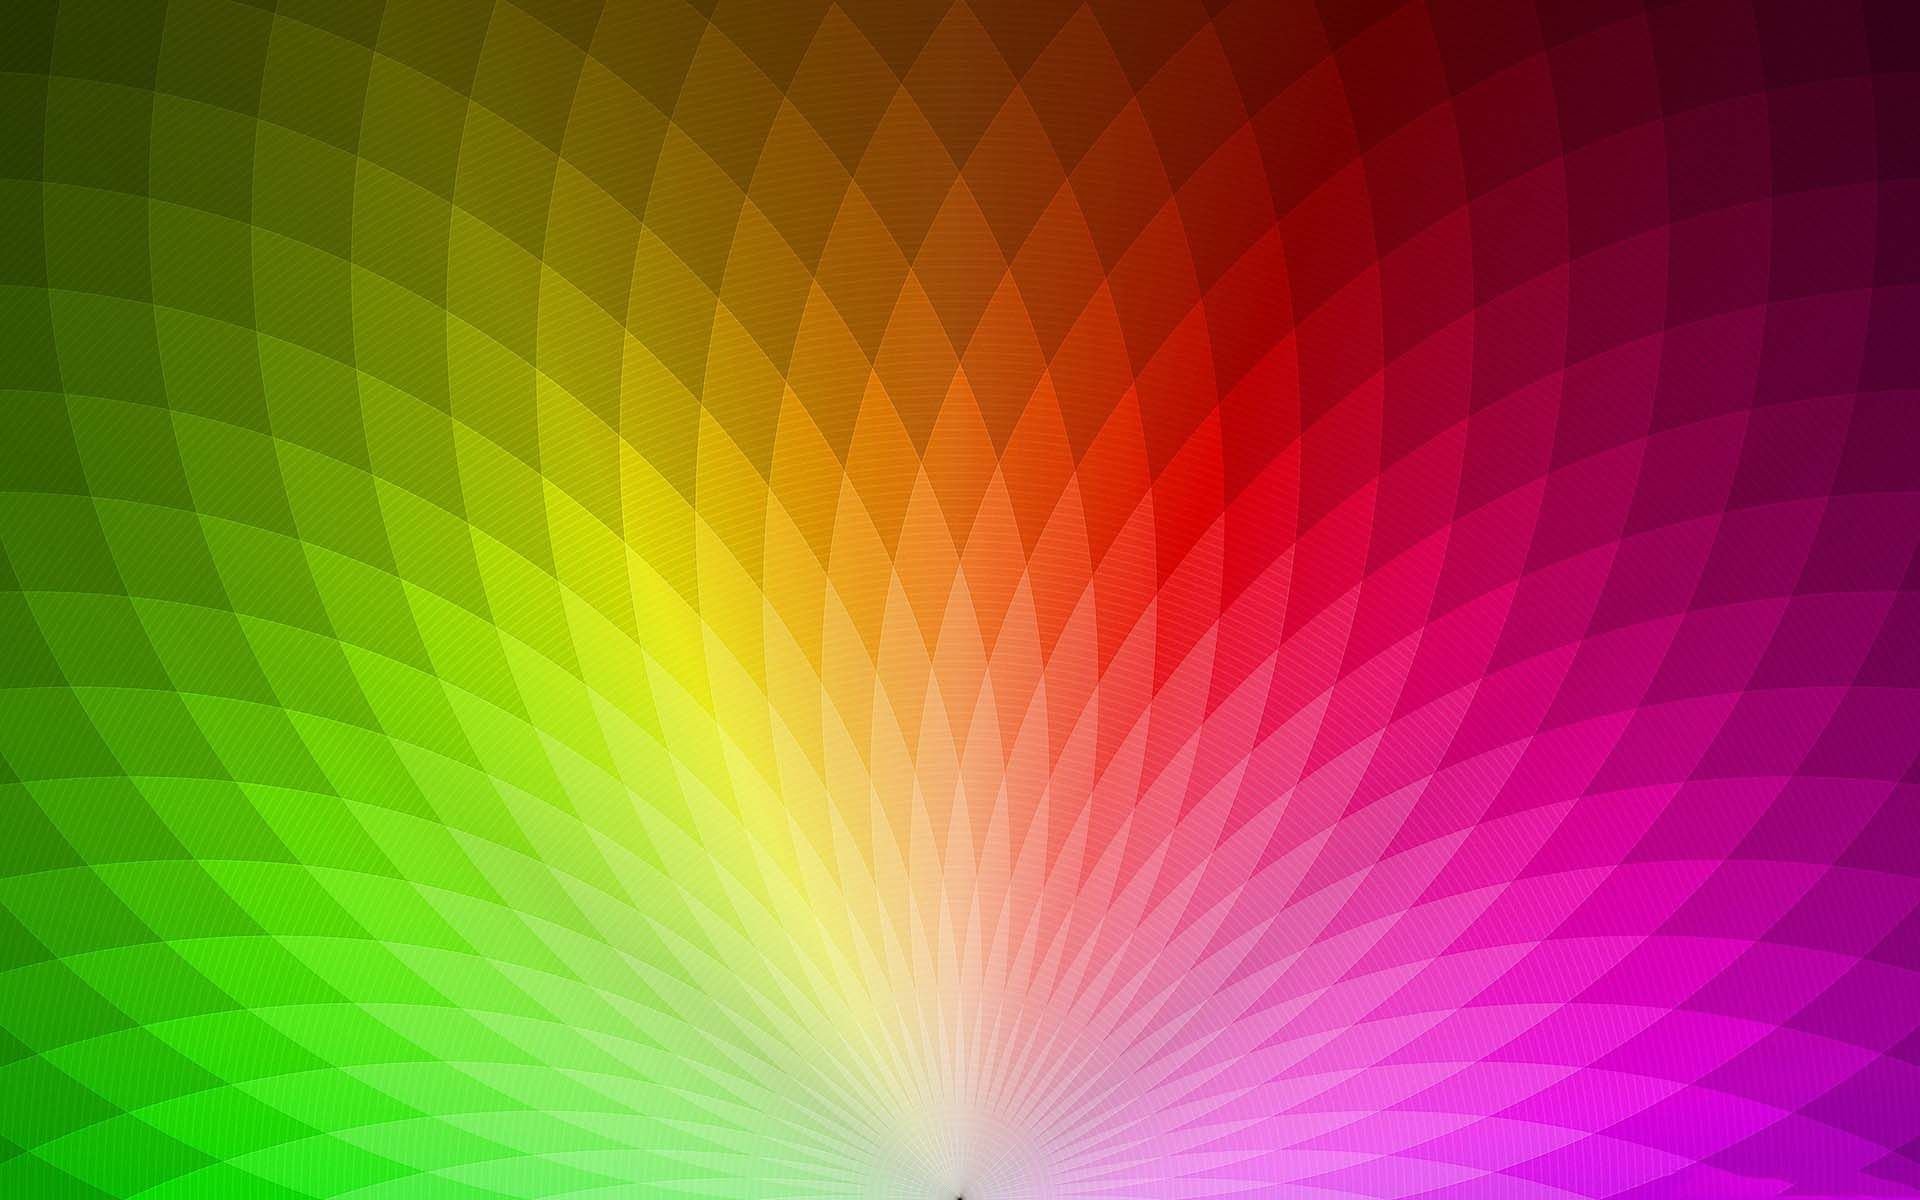 Rainbow Pattern Wallpaper. HD 3D and Abstract Wallpaper for Mobile and Desktop